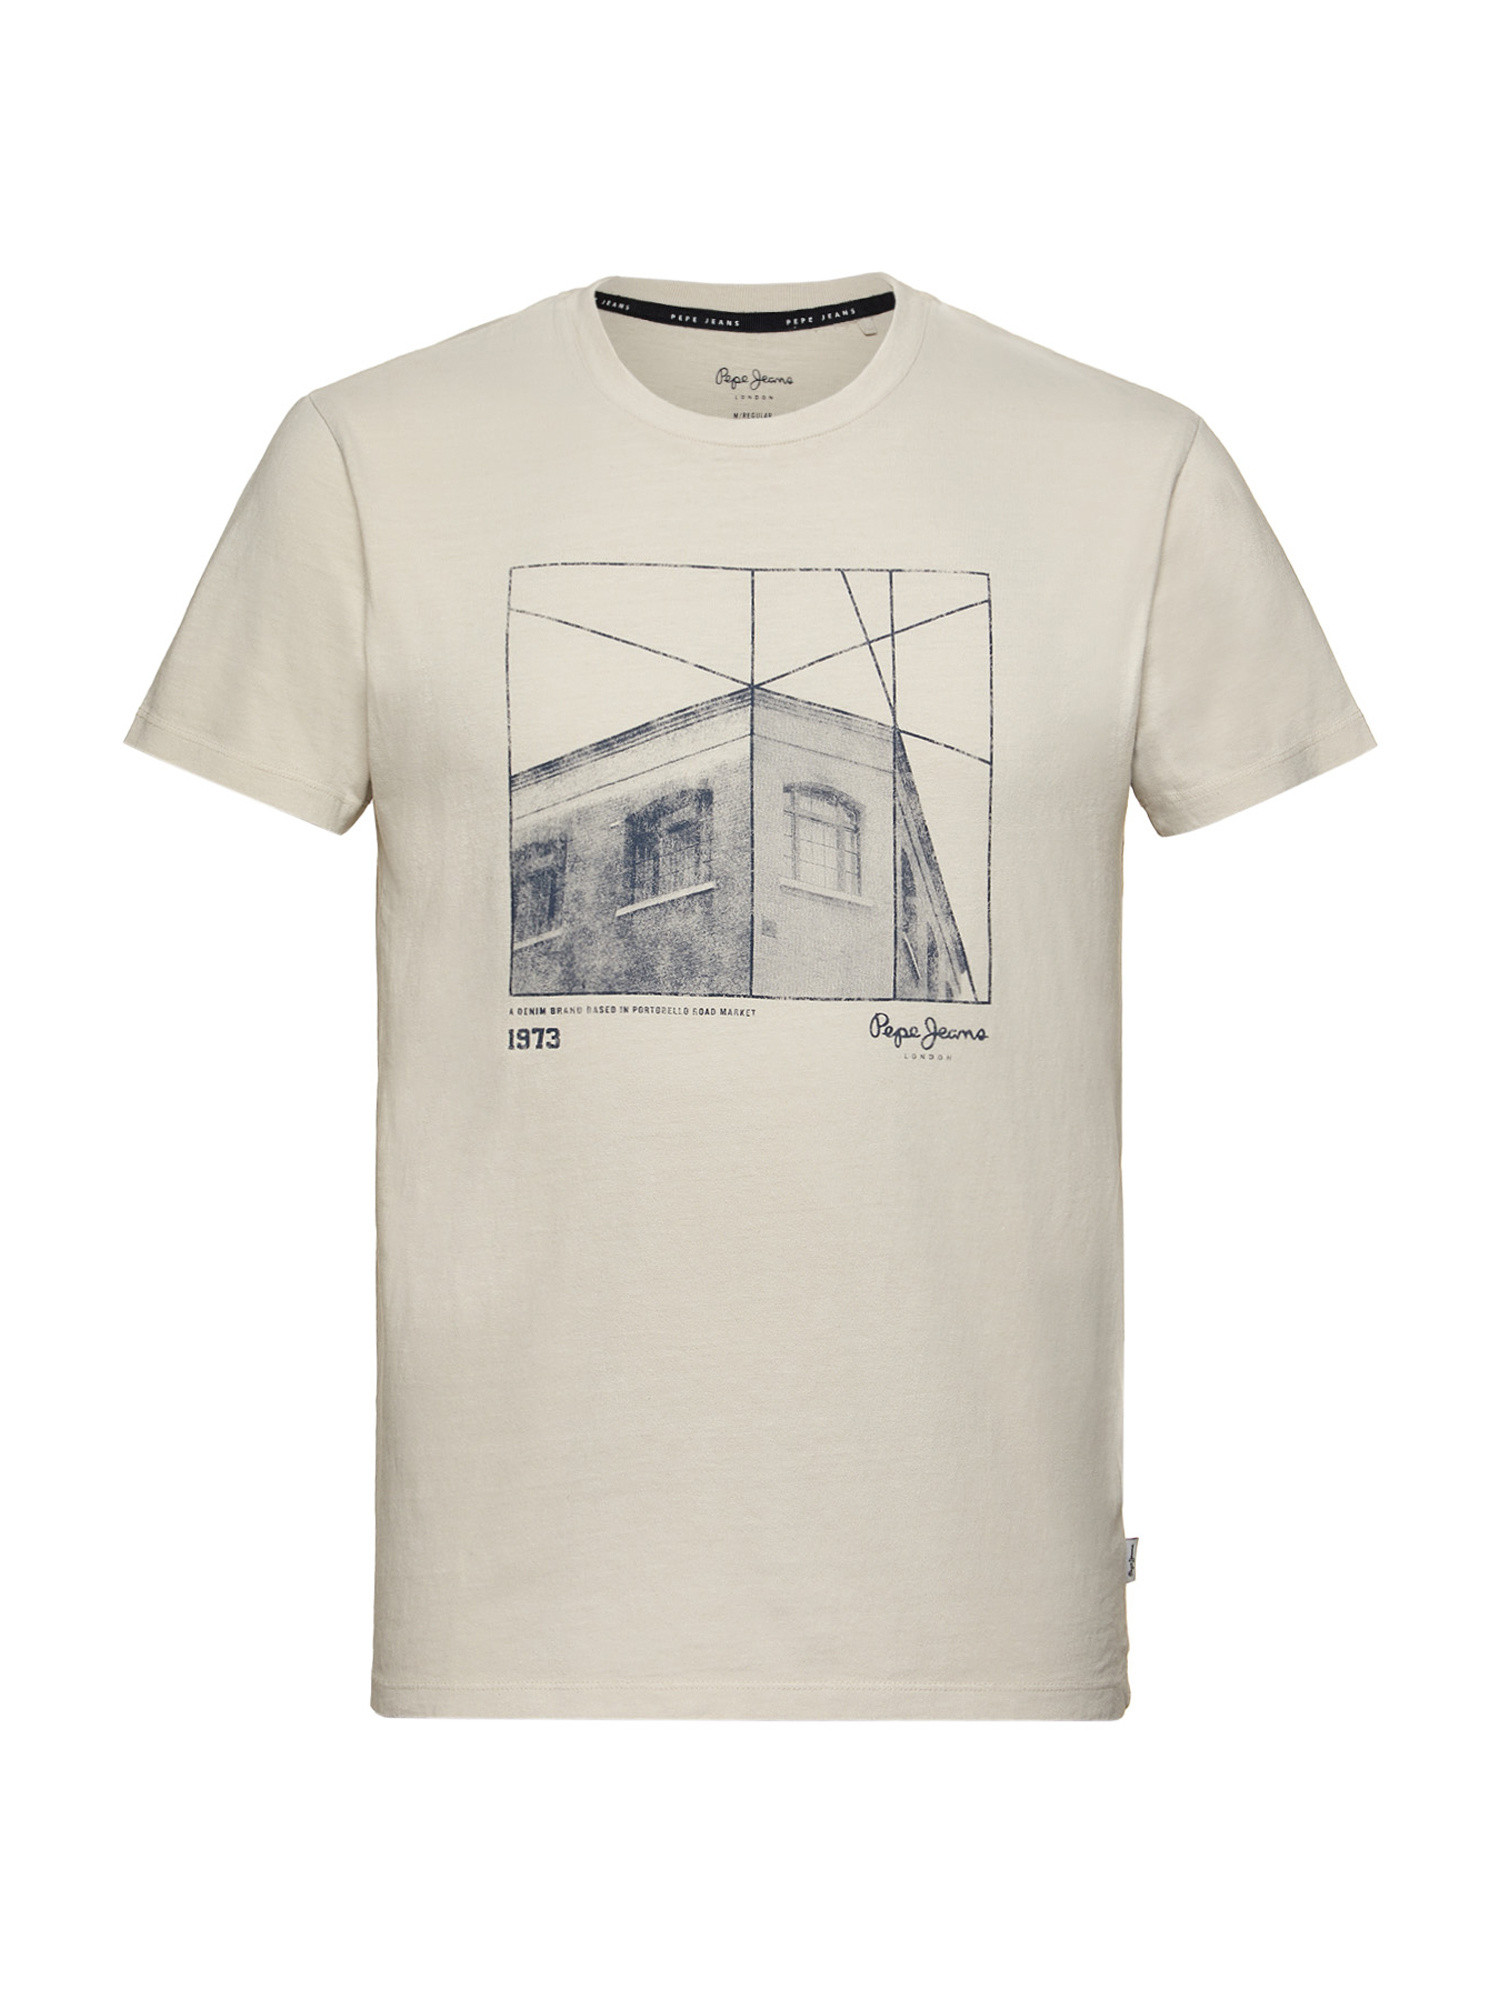 Pepe Jeans -T-shirt regular fit in cotone con stampa, Bianco, large image number 0